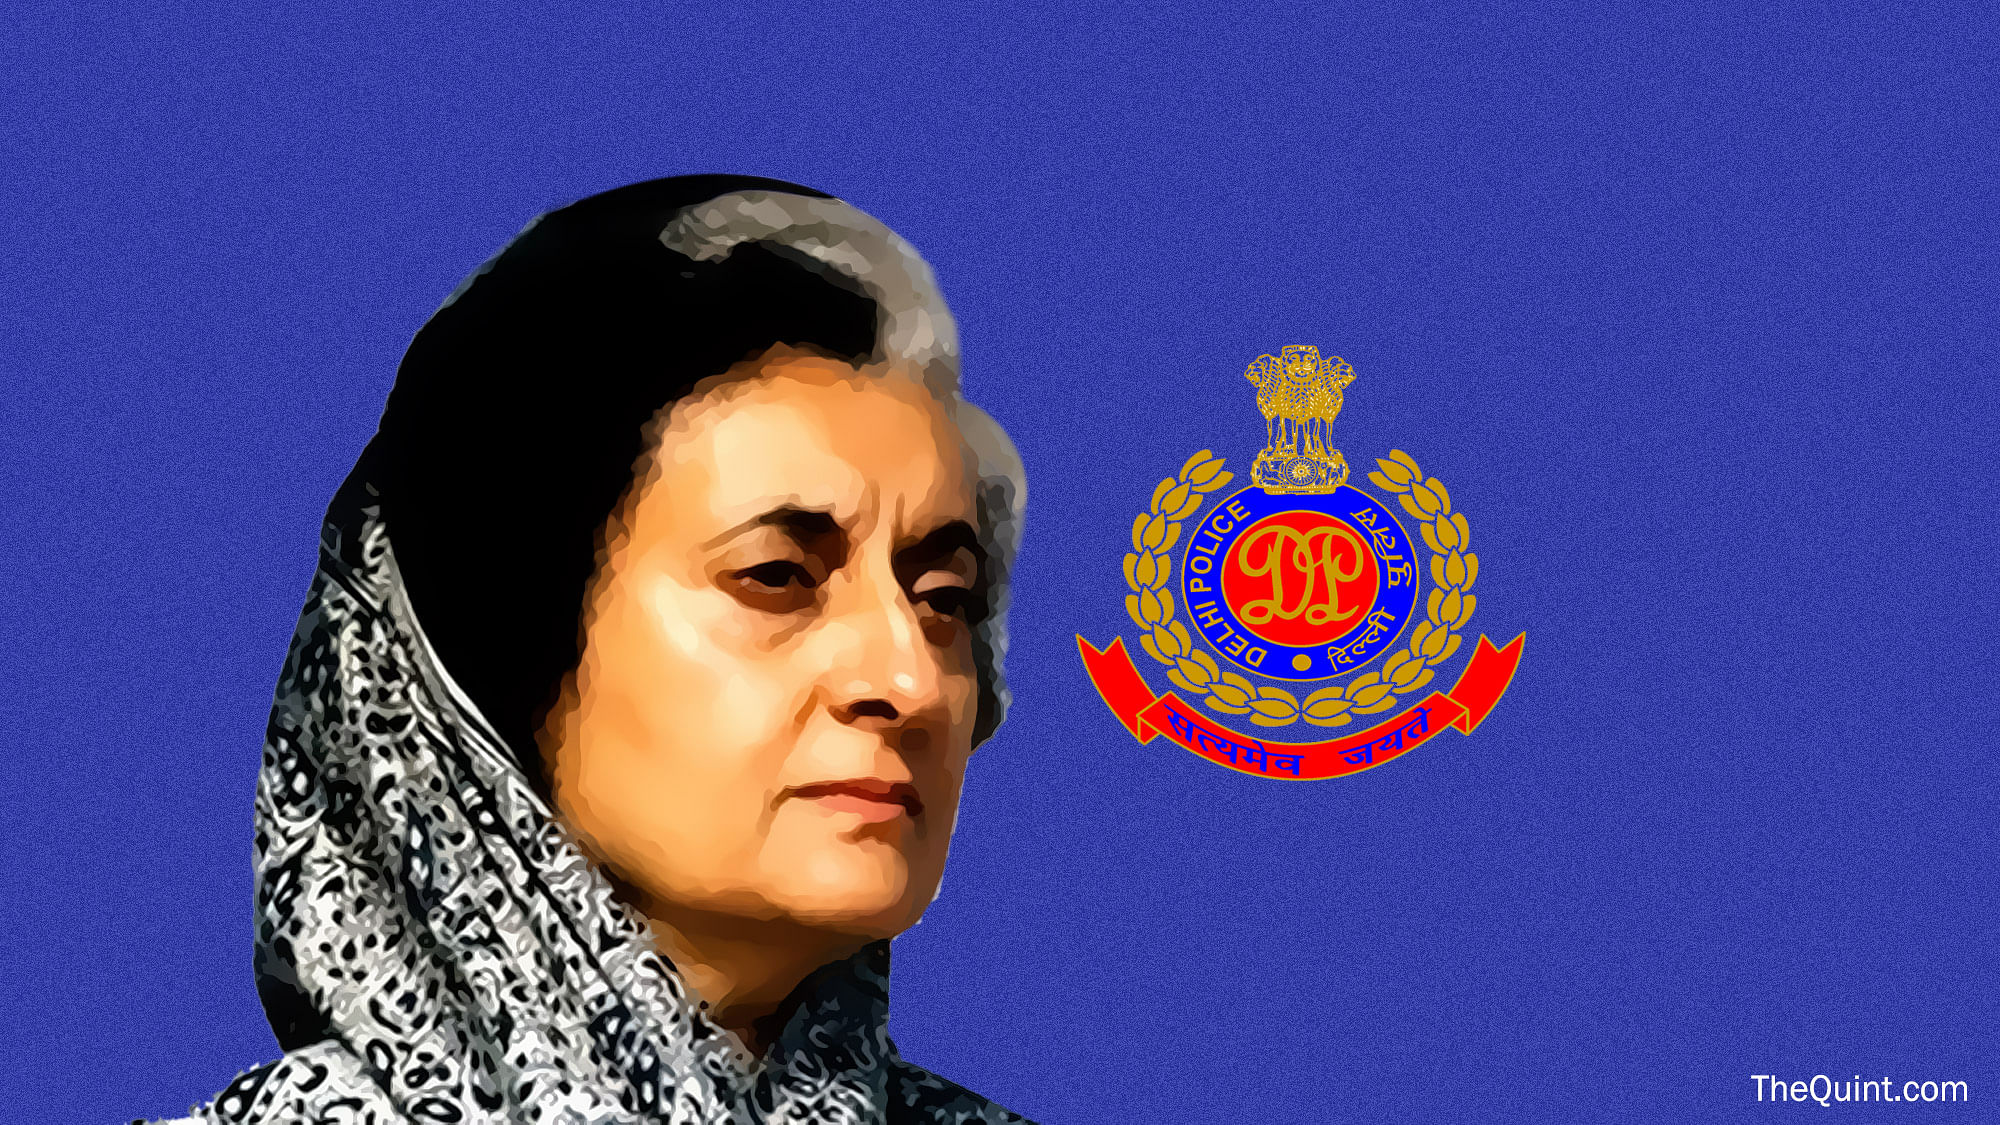 Tughlaq Road police station became an unfortunate link between Indira and Mahatama Gandhi’s assassinations.